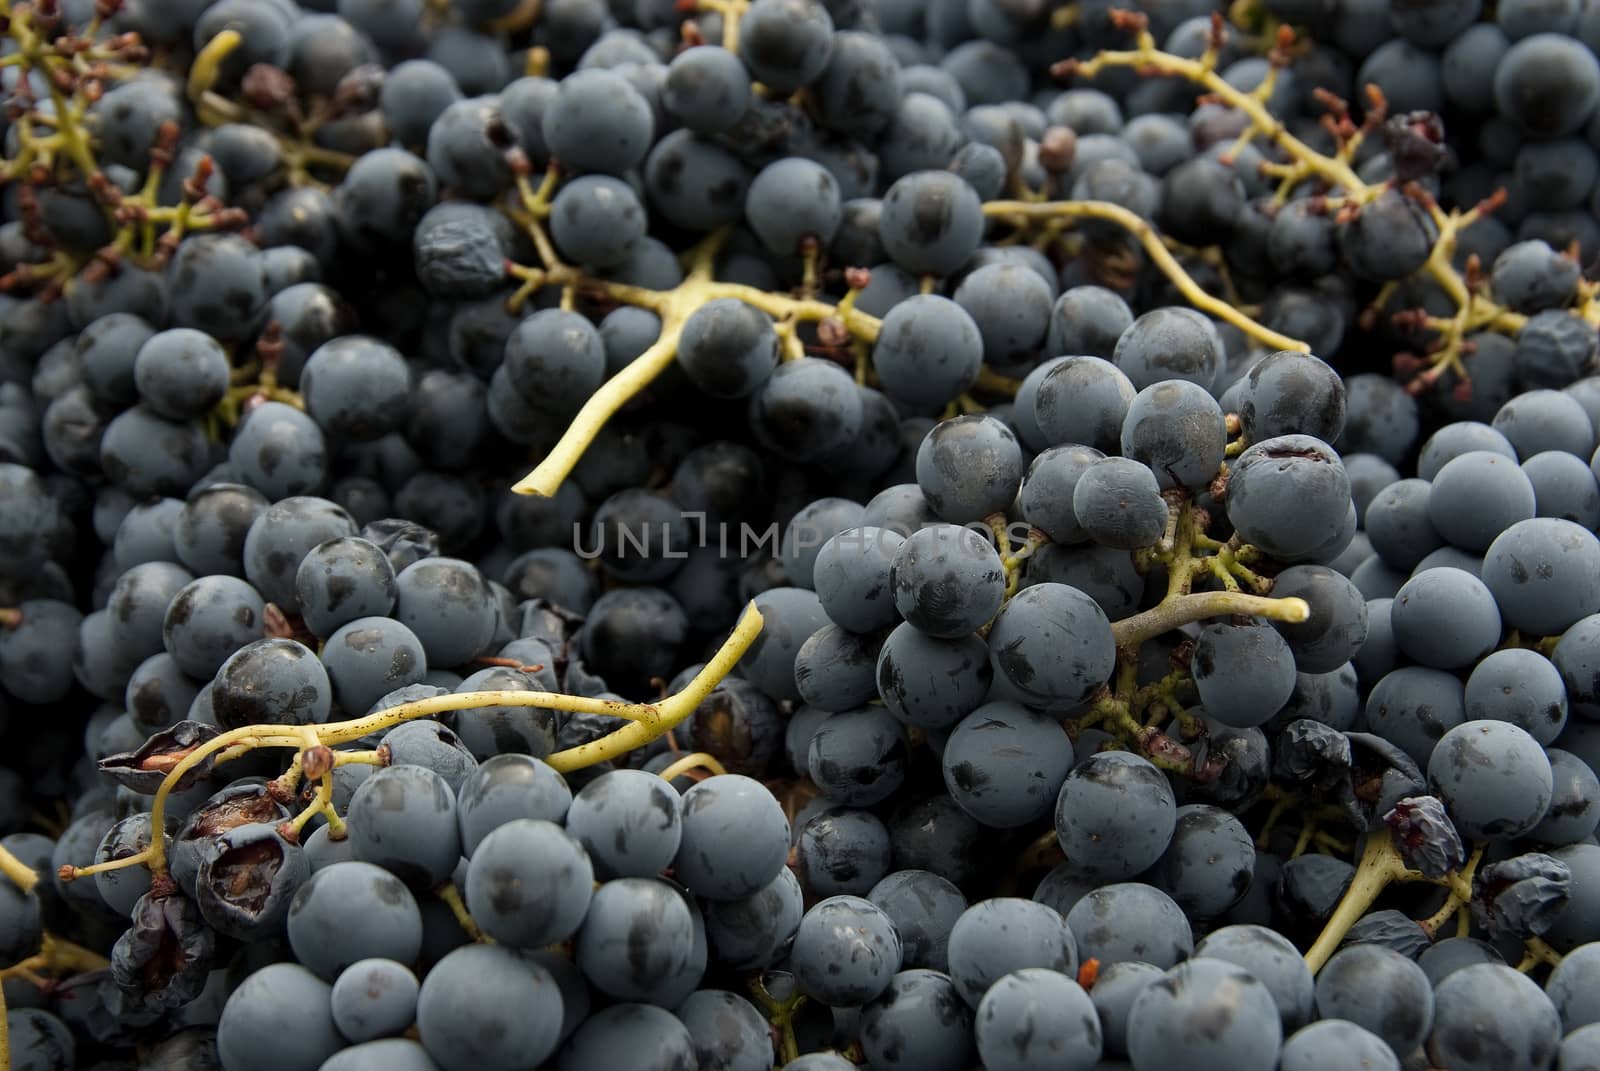 harvesting, black grapes, bunches of grapes, for red wine by jalonsohu@gmail.com